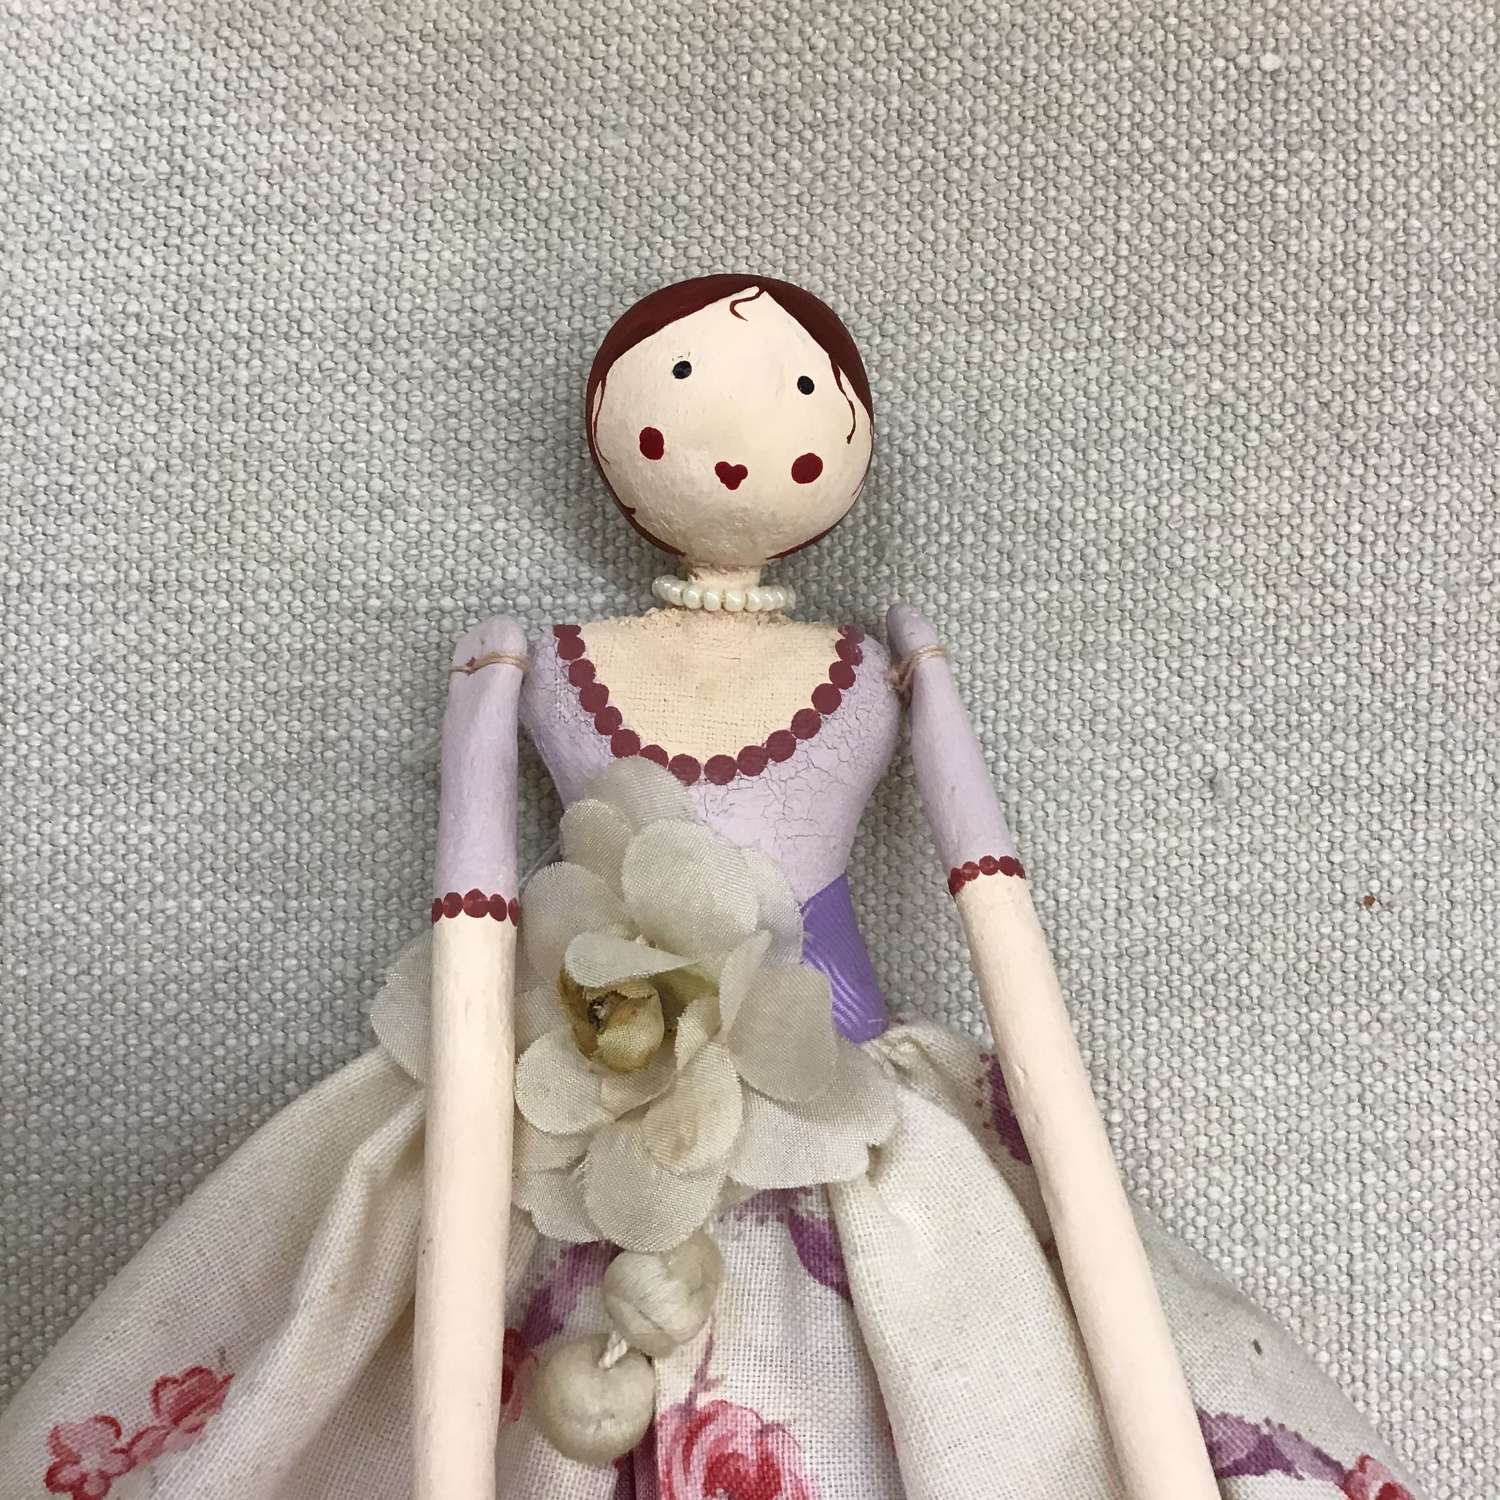 Hand crafted paper clay doll dressed in vintage fabric and trims